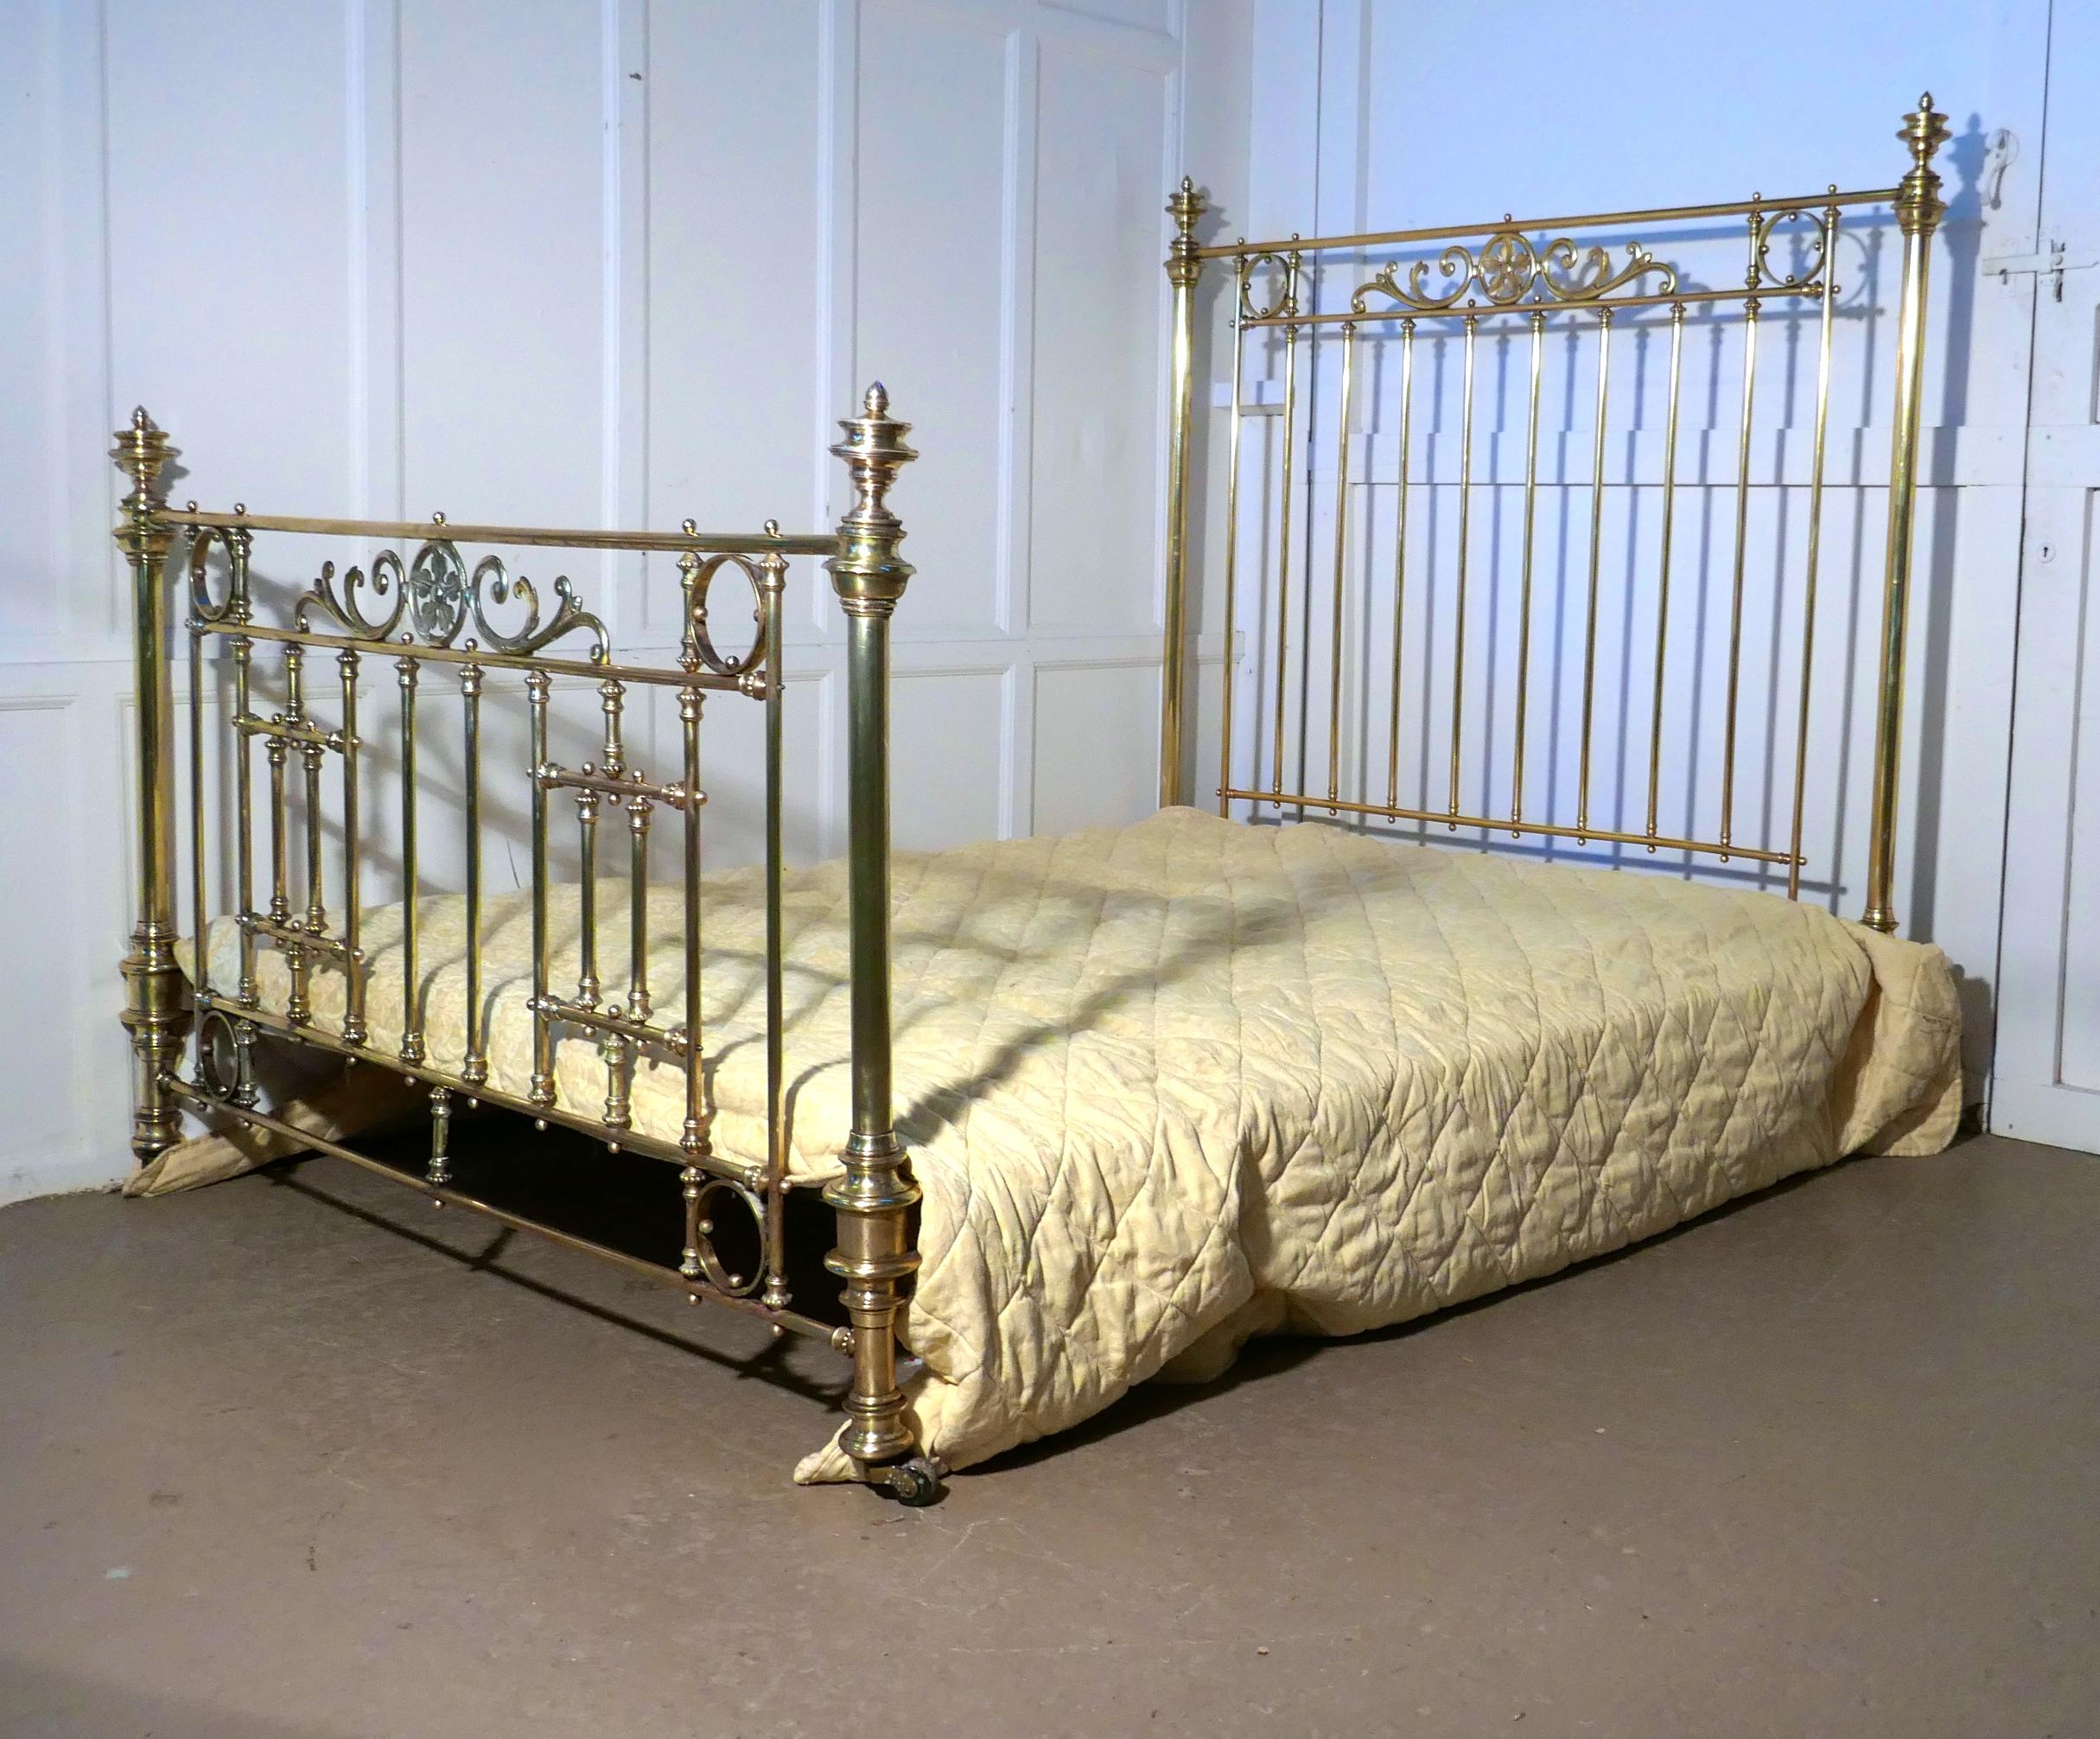 Spectacular French Art Nouveau brass king-size bed

This is a superb quality piece made in solid brass, with Fine detail to the casting and magnificent design and craftsman ship

The head and foot of the bed have exquisite brass decoration with